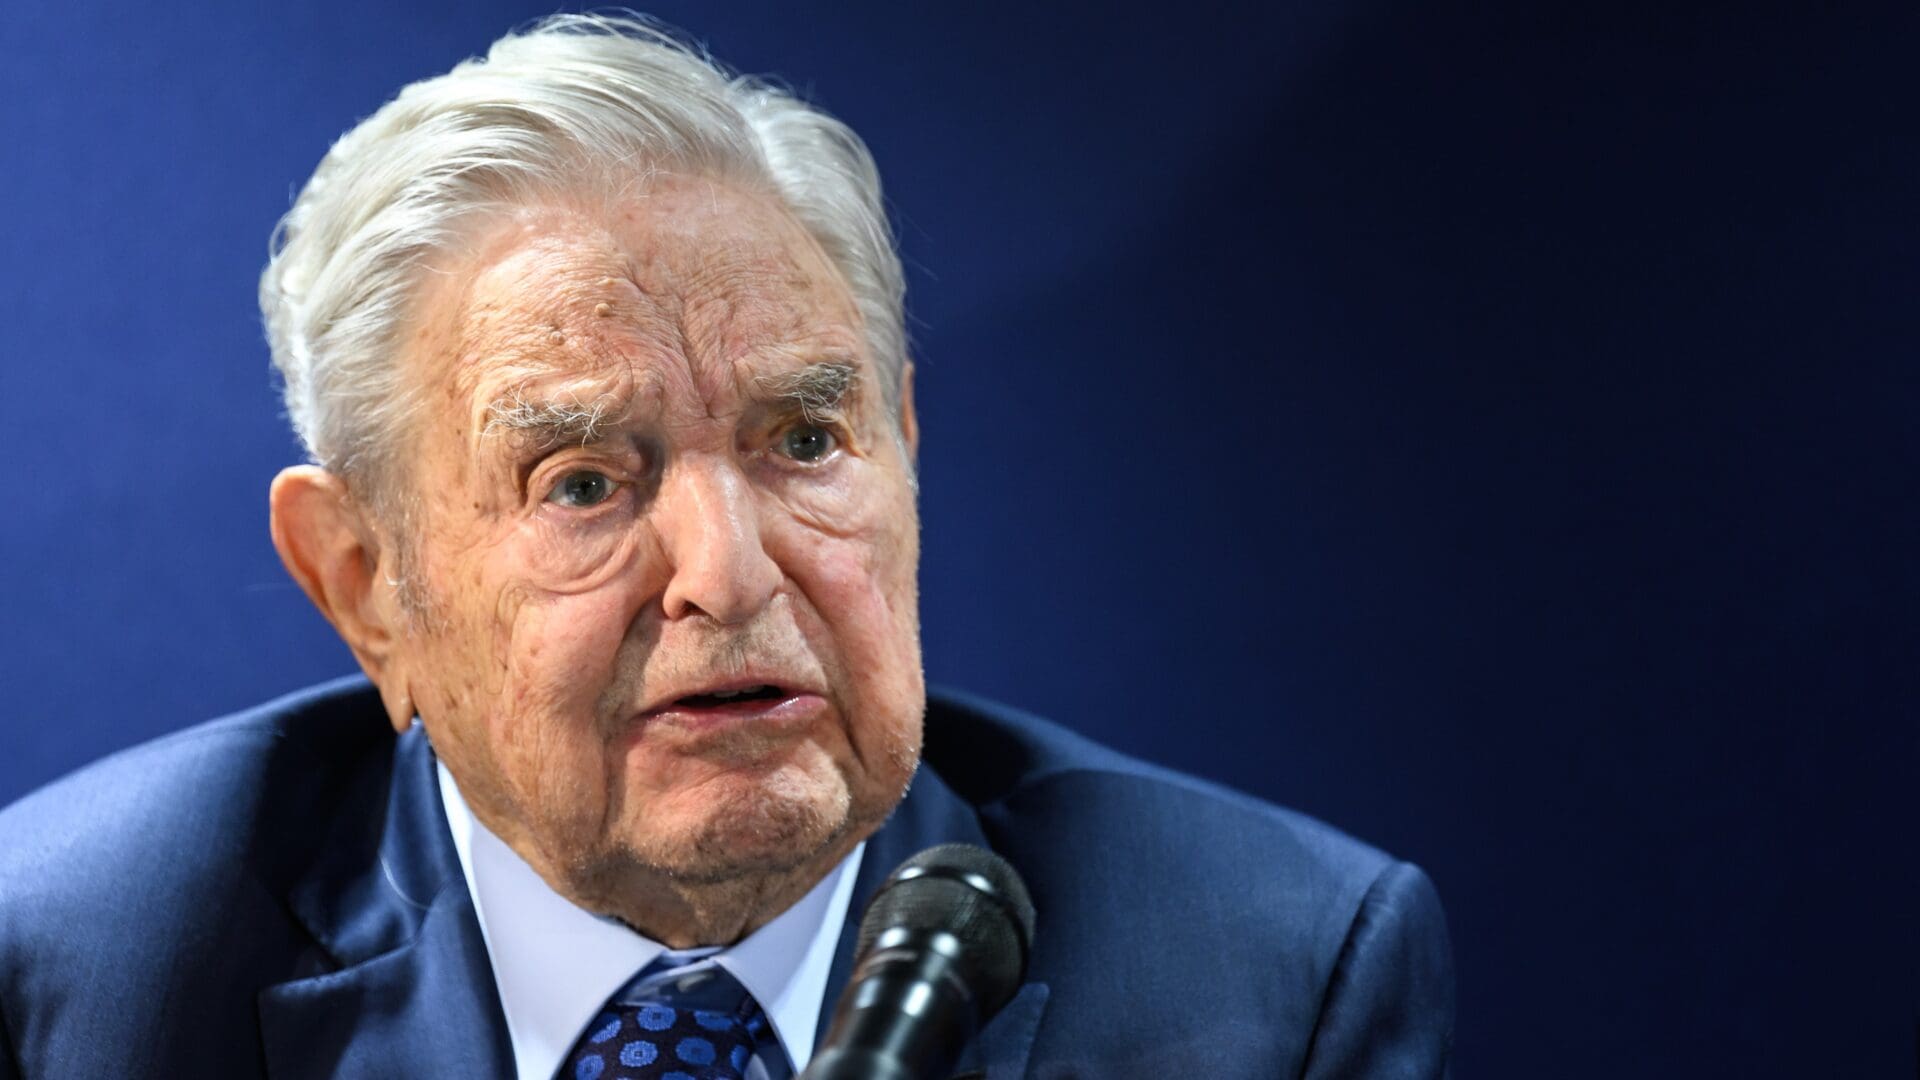 Hungarian-born US investor and philanthropist George Soros answers to questions after delivering a speech on the sidelines of the World Economic Forum (WEF) annual meeting in Davos on 24 May 2022.